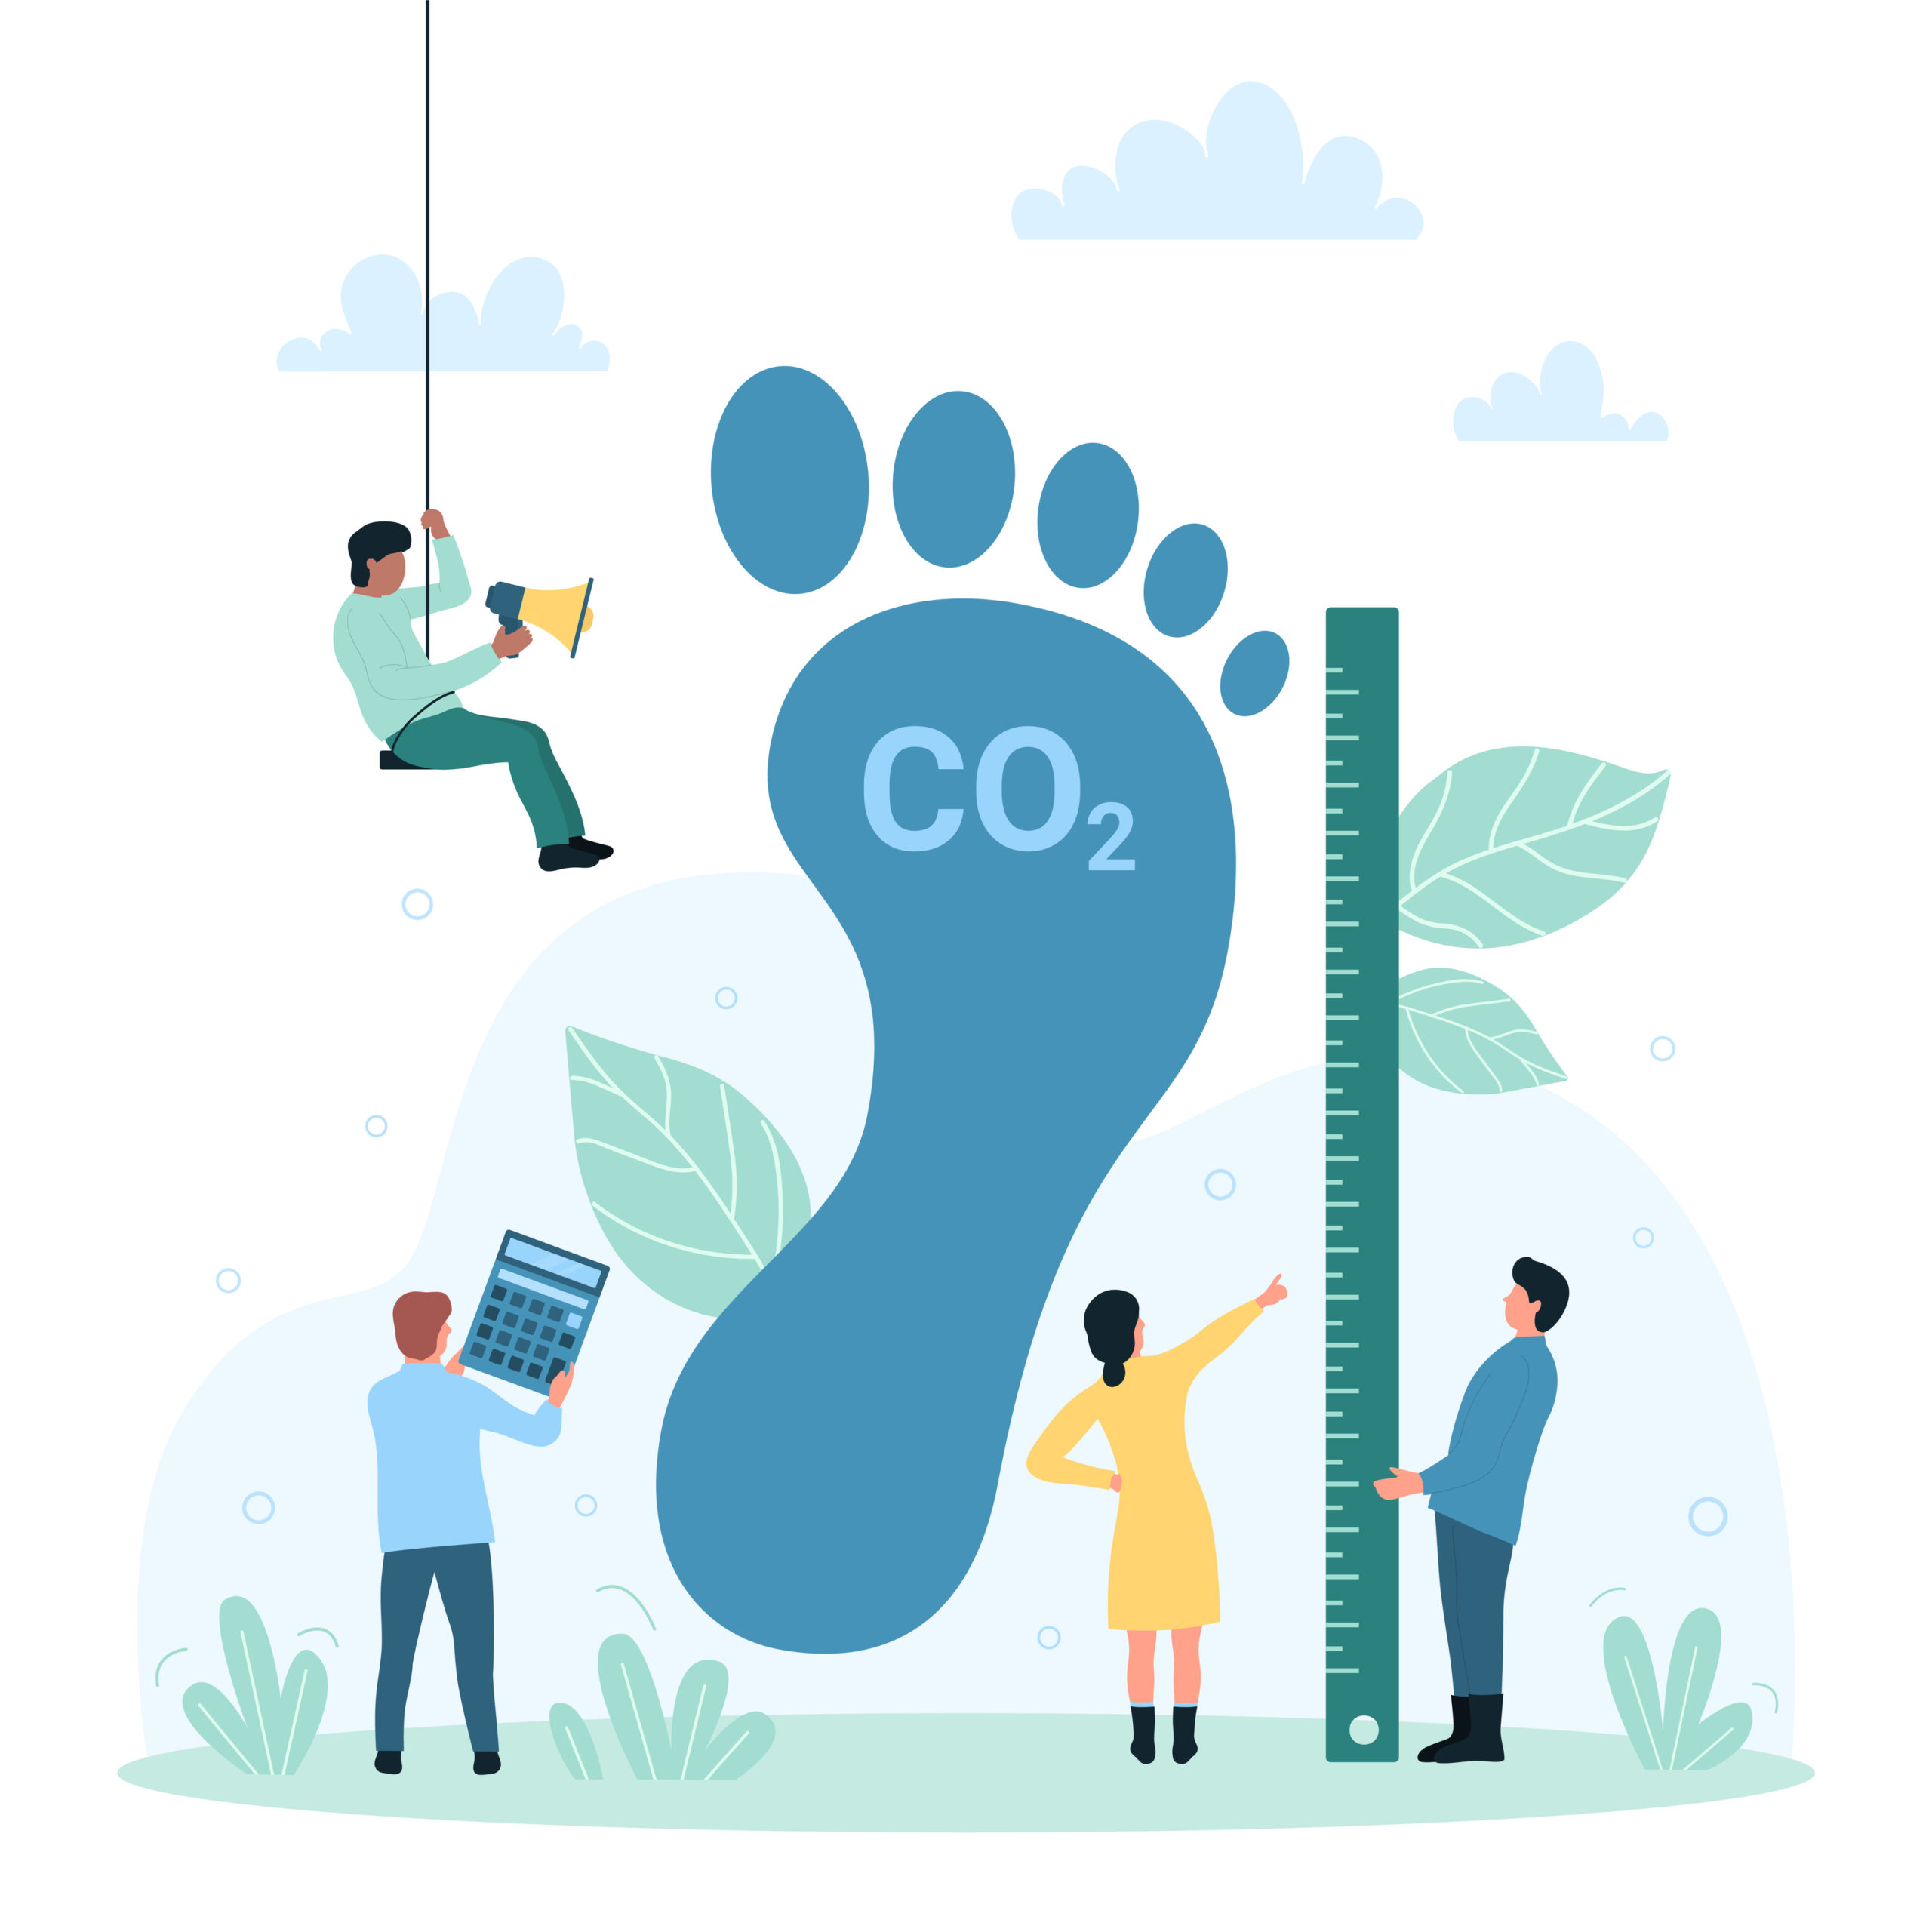 Carbon footprint pollution, environmental effect of greenhouse gas vector illustration. Cartoon tiny people measure big foot of CO2, calculate impact on ecology of planet using calculator and ruler